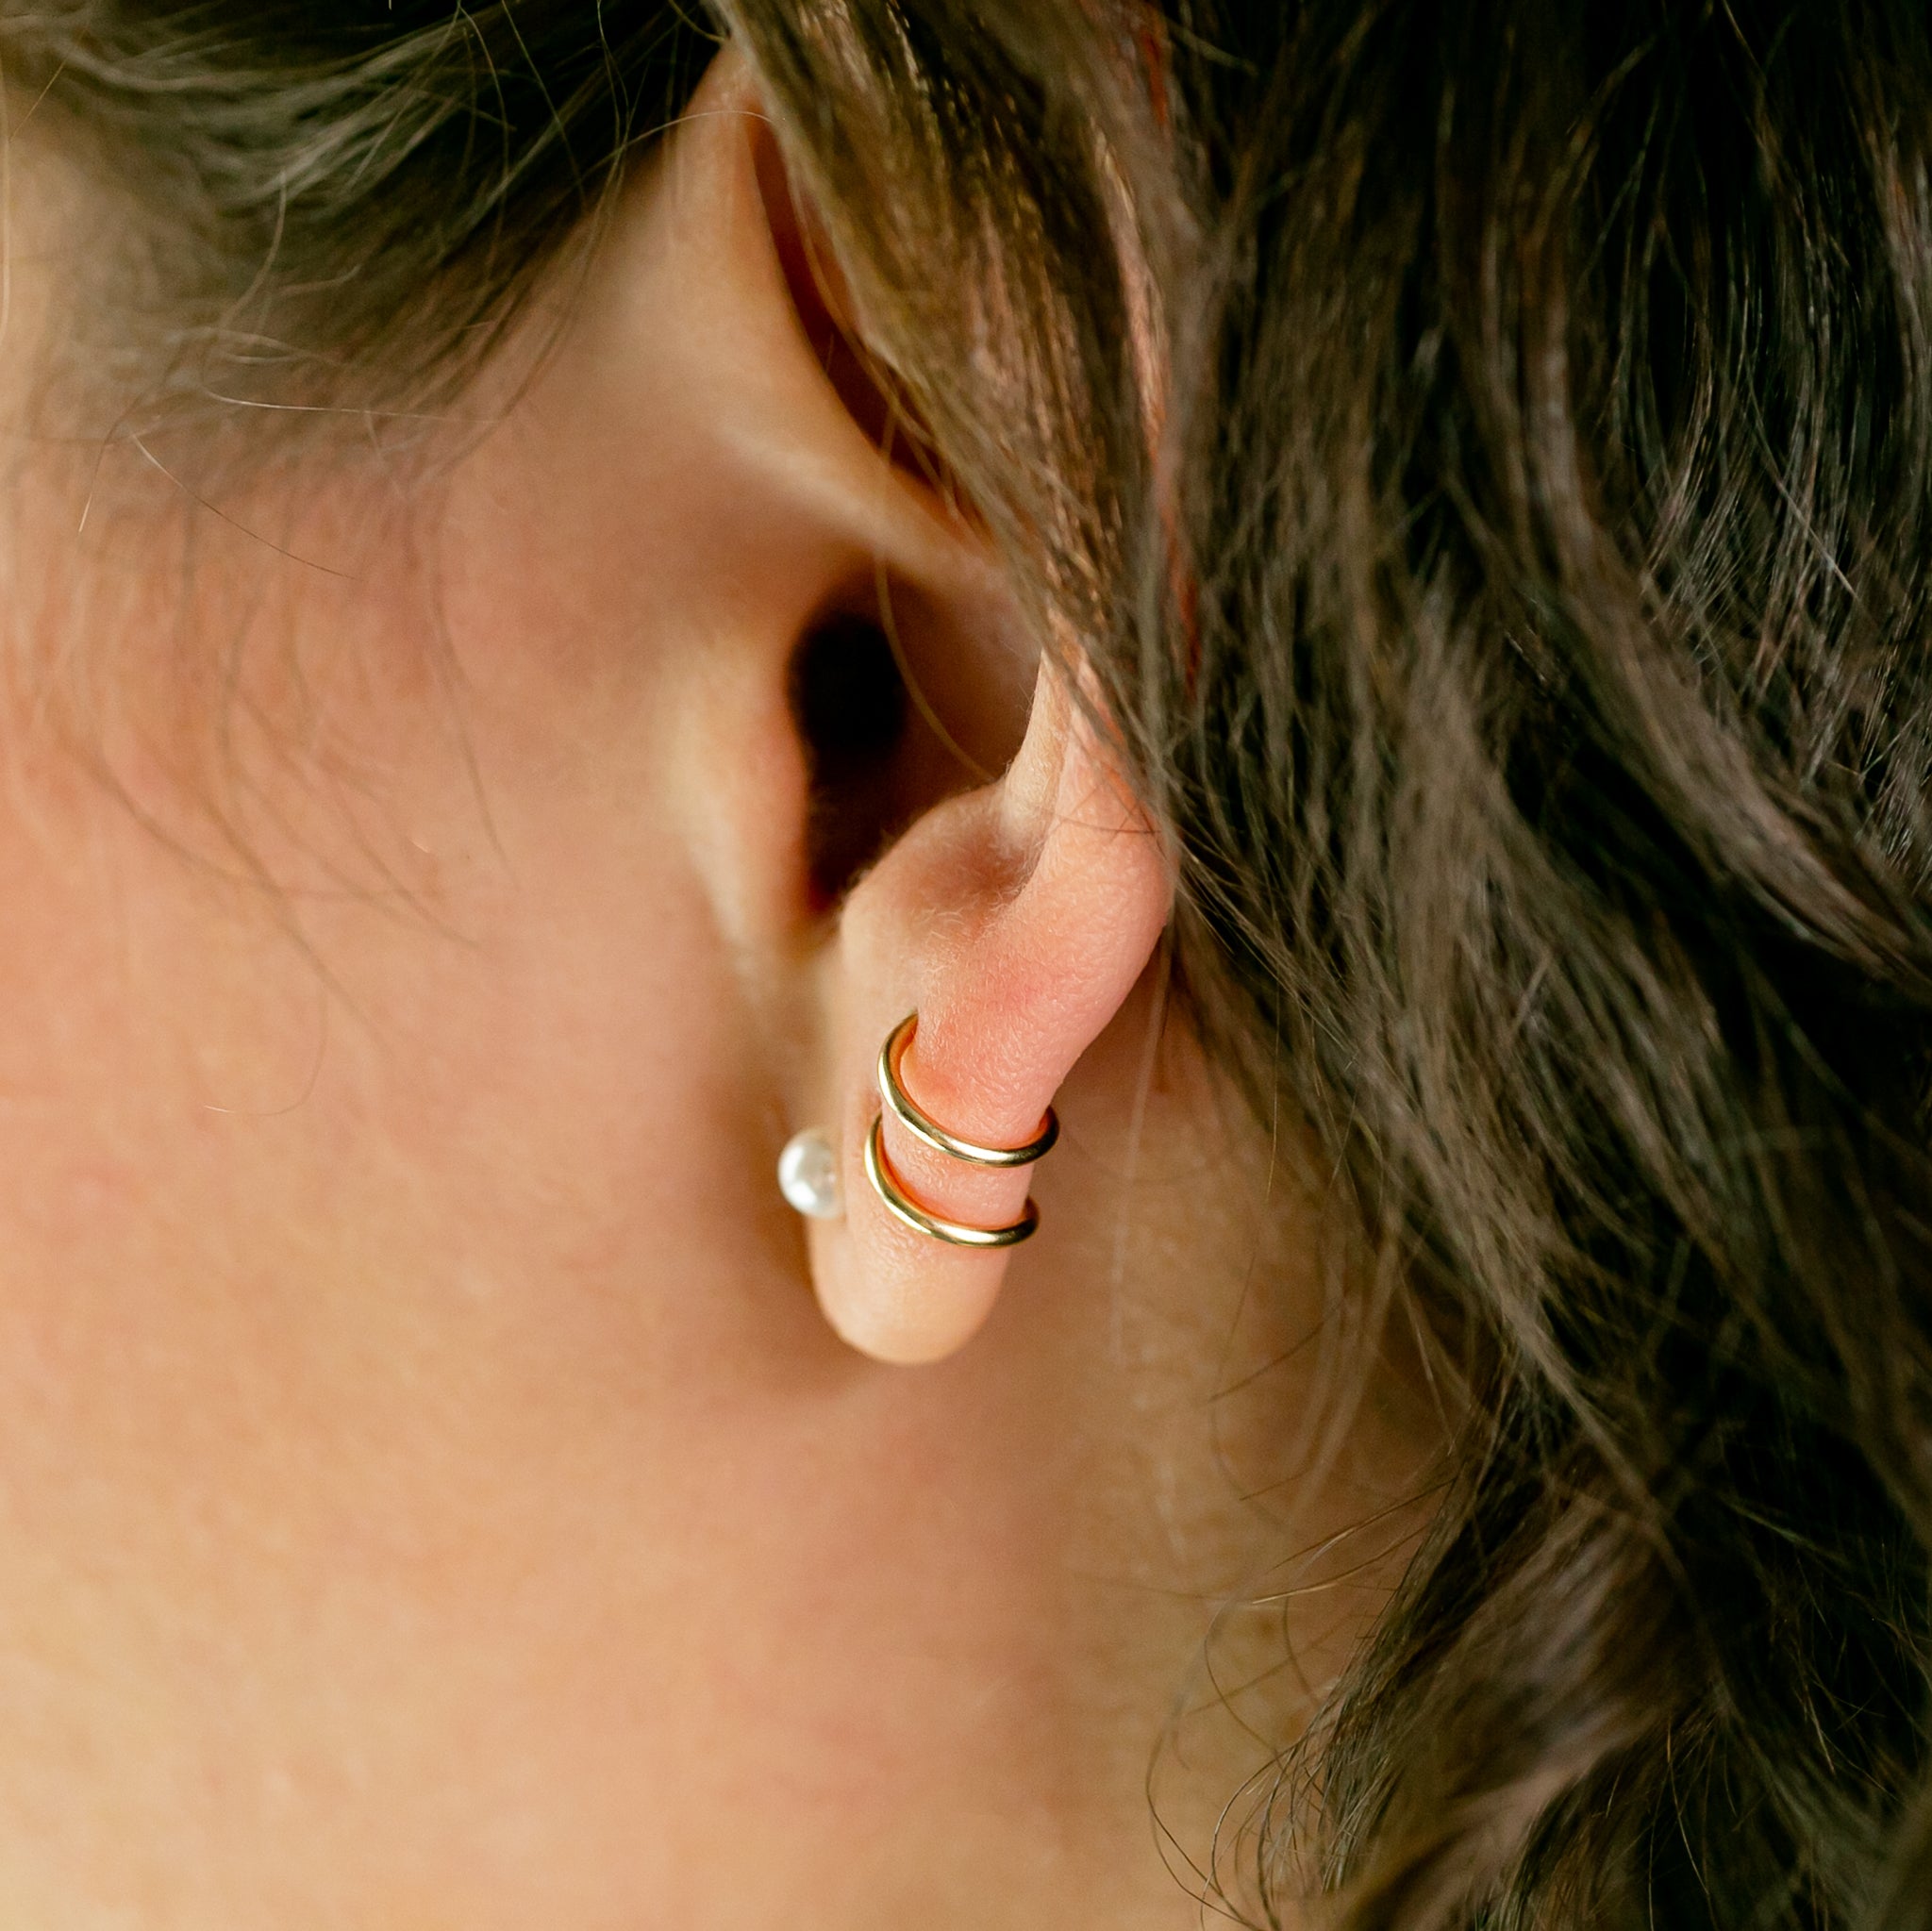 Conch Hoop 14K Gold Filled Conch Piercing Gold Hoop Earrings conch Earrings  Silver Conch Rose Conch Ring Hoop Earrings Cartilage - Etsy